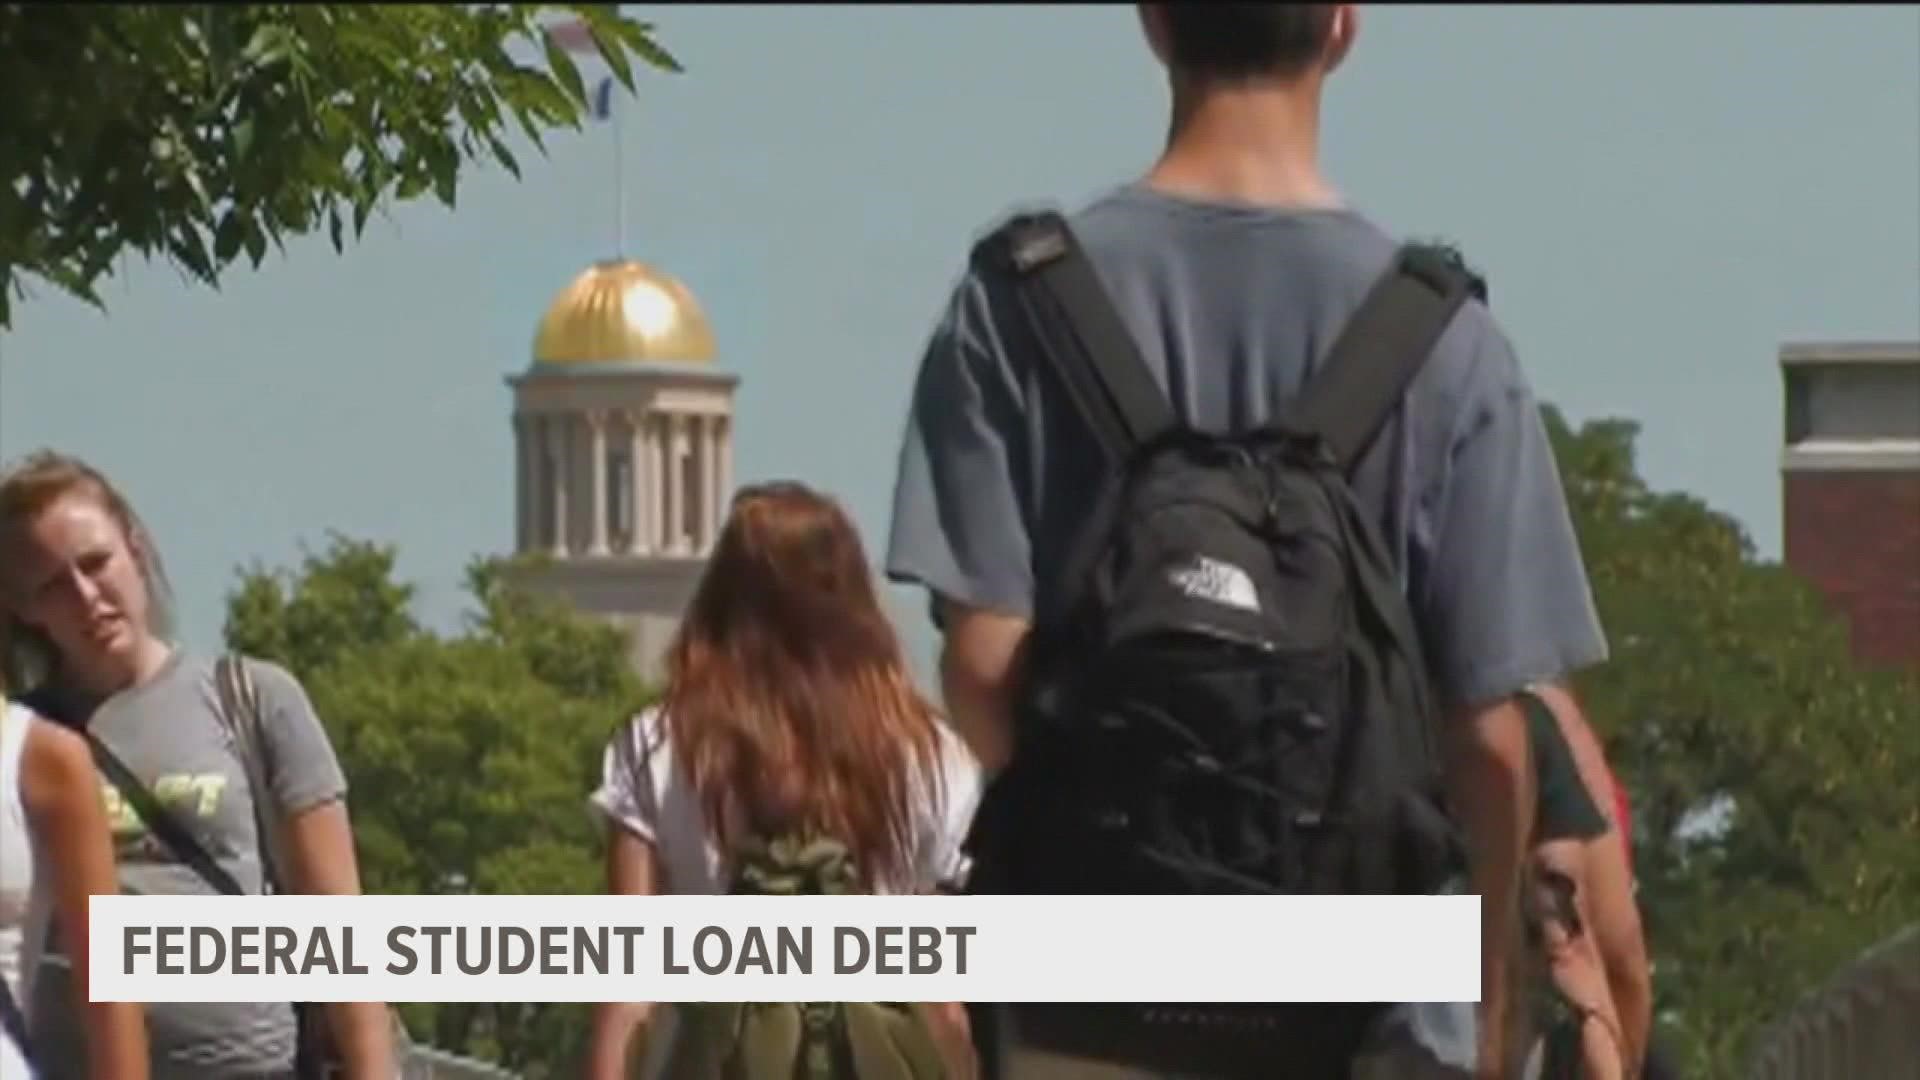 The action applies to more than 43 million Americans who owe a combined $1.6 trillion in student loan debt held by the federal government.